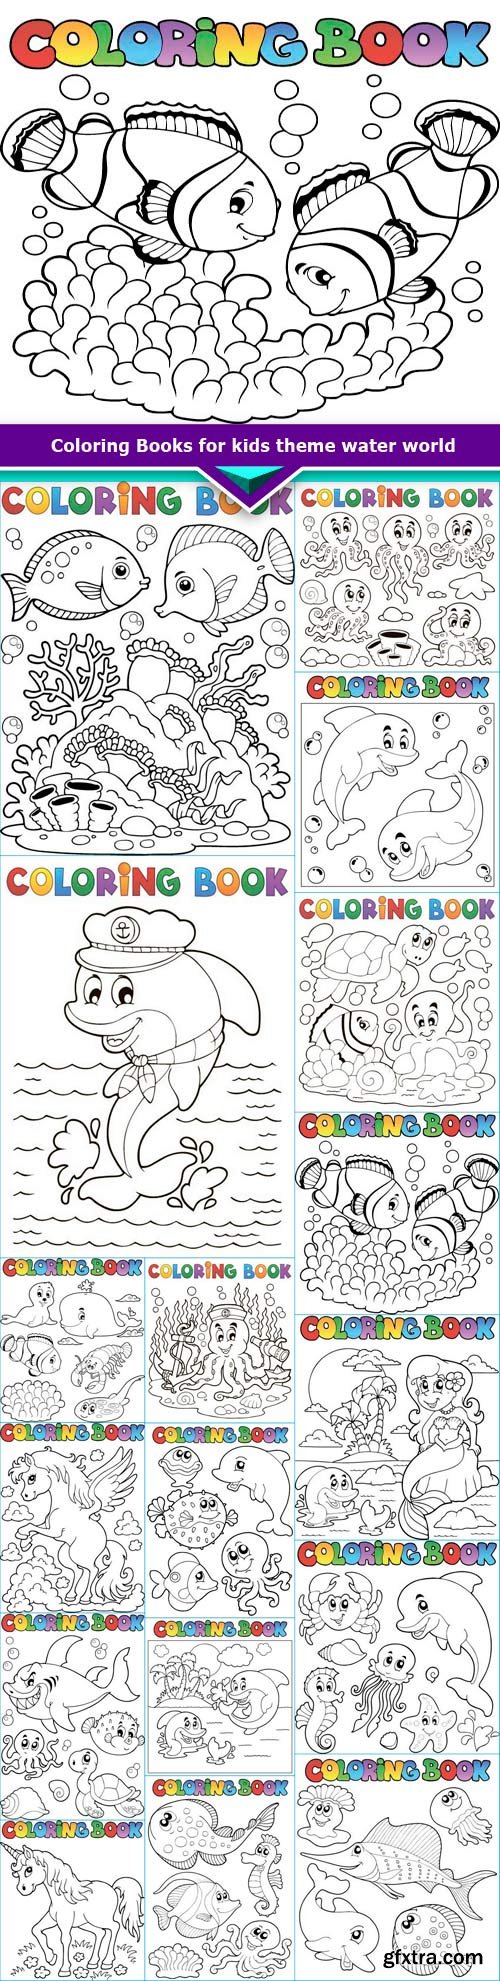 Coloring Books for kids theme water world 17x EPS